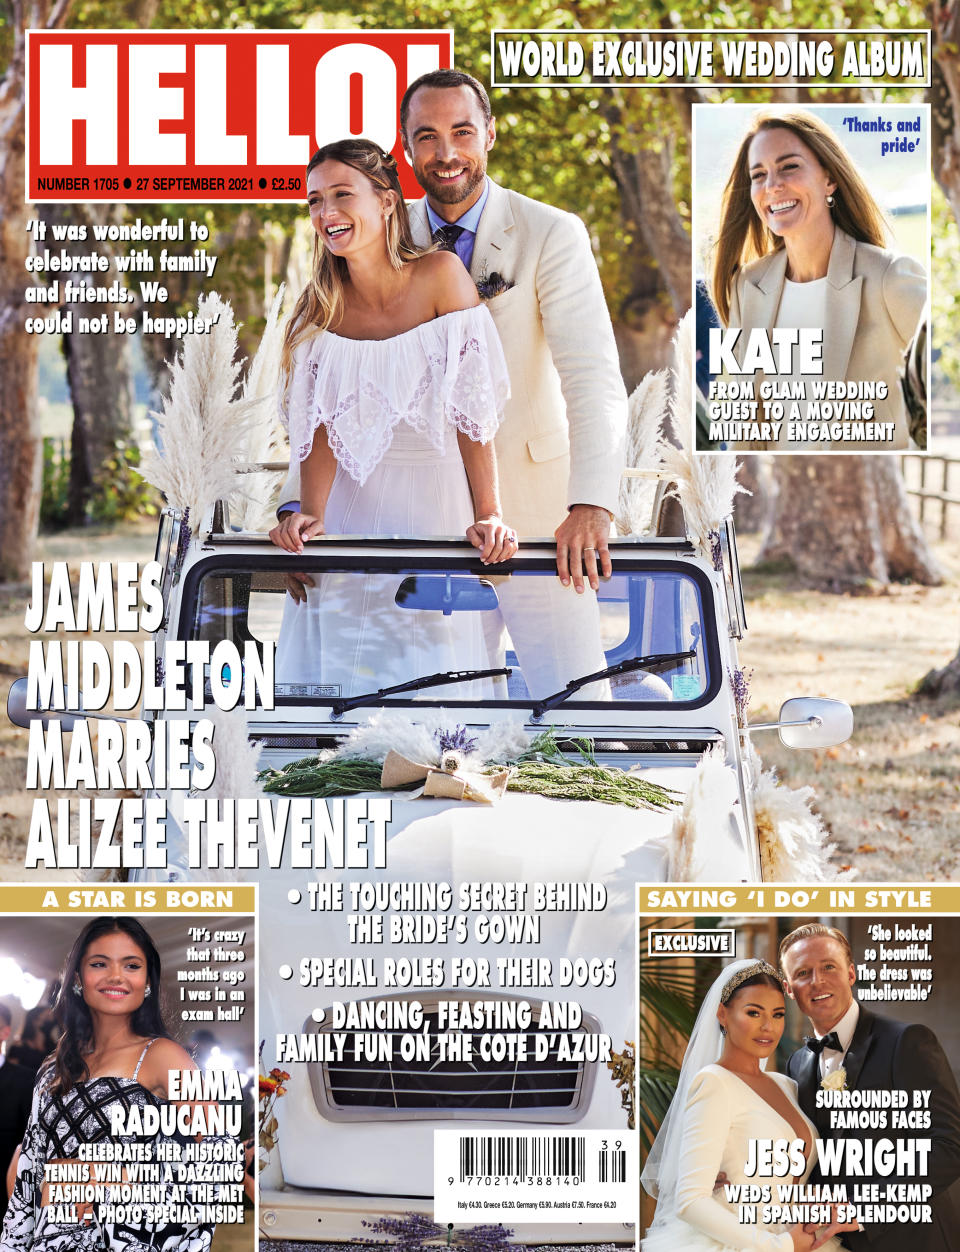 More details about the wedding are in this week's HELLO! out today. (Supplied HELLO!)